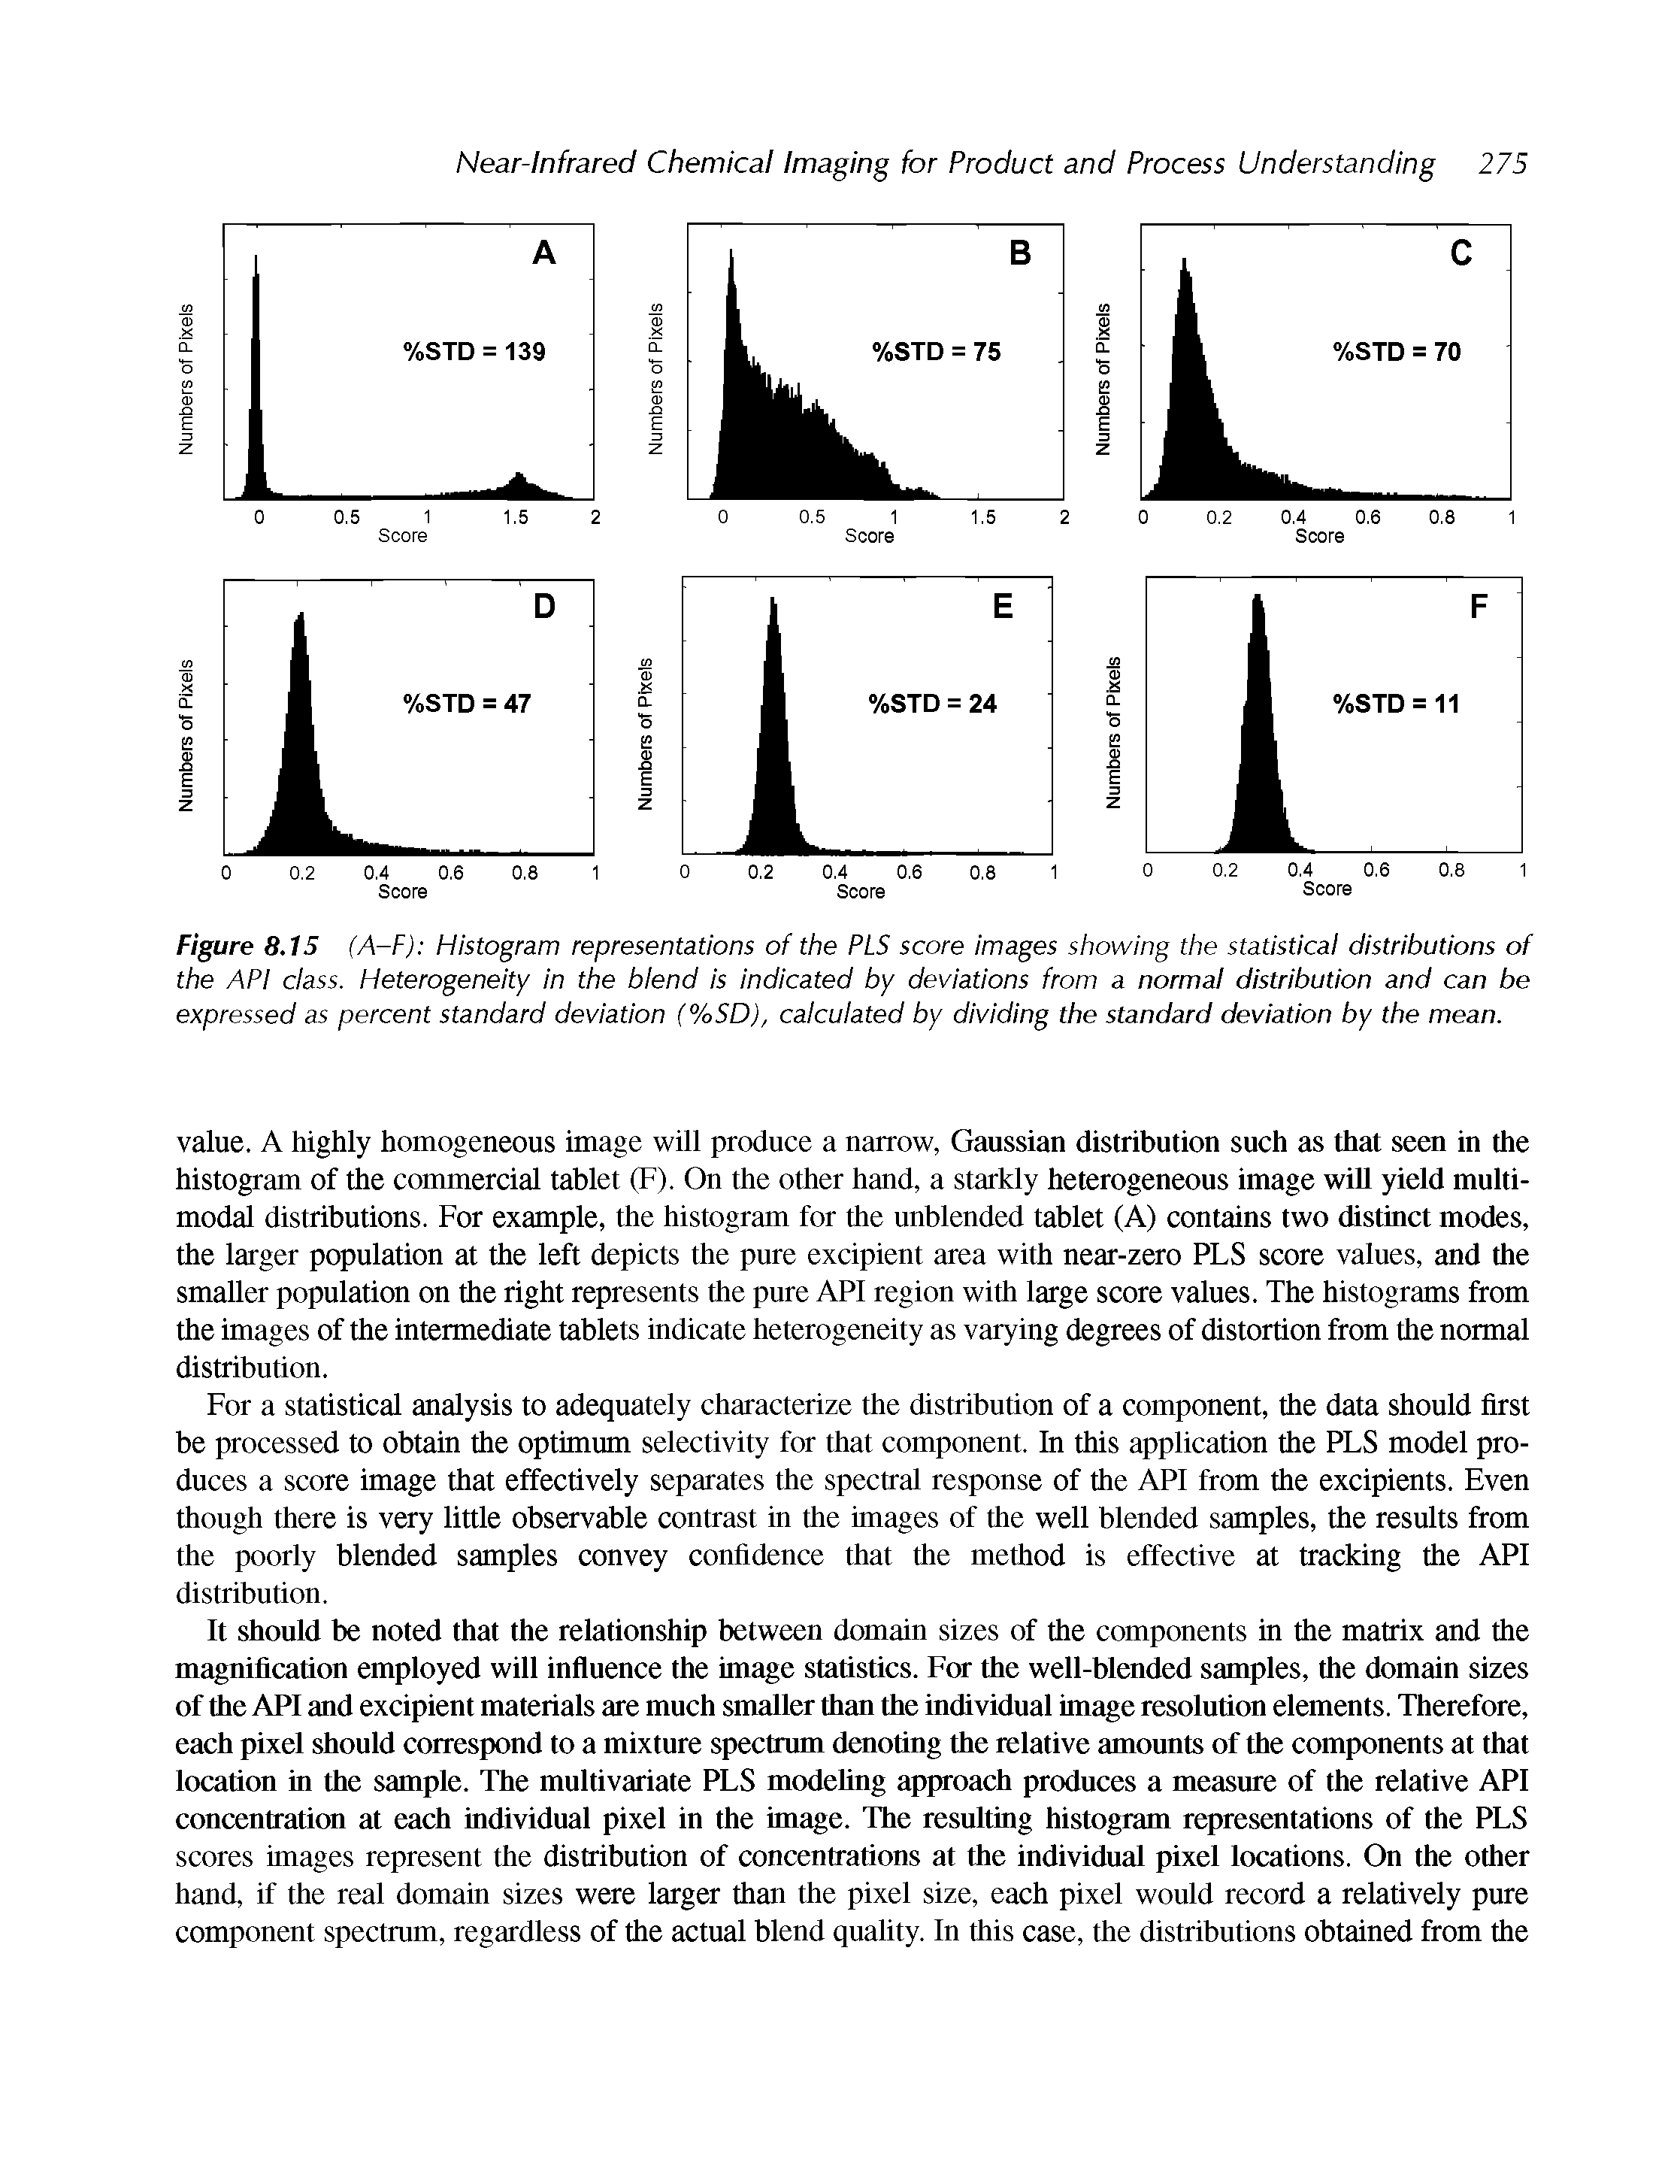 Figure 8.15 (A-F) hiistogram representations of the PLS score images showing the statistical distributions of the API class. Heterogeneity In the blend Is Indicated by deviations from a normal distribution and can be expressed as percent standard deviation (%SD), calculated by dividing the standard deviation by the mean.